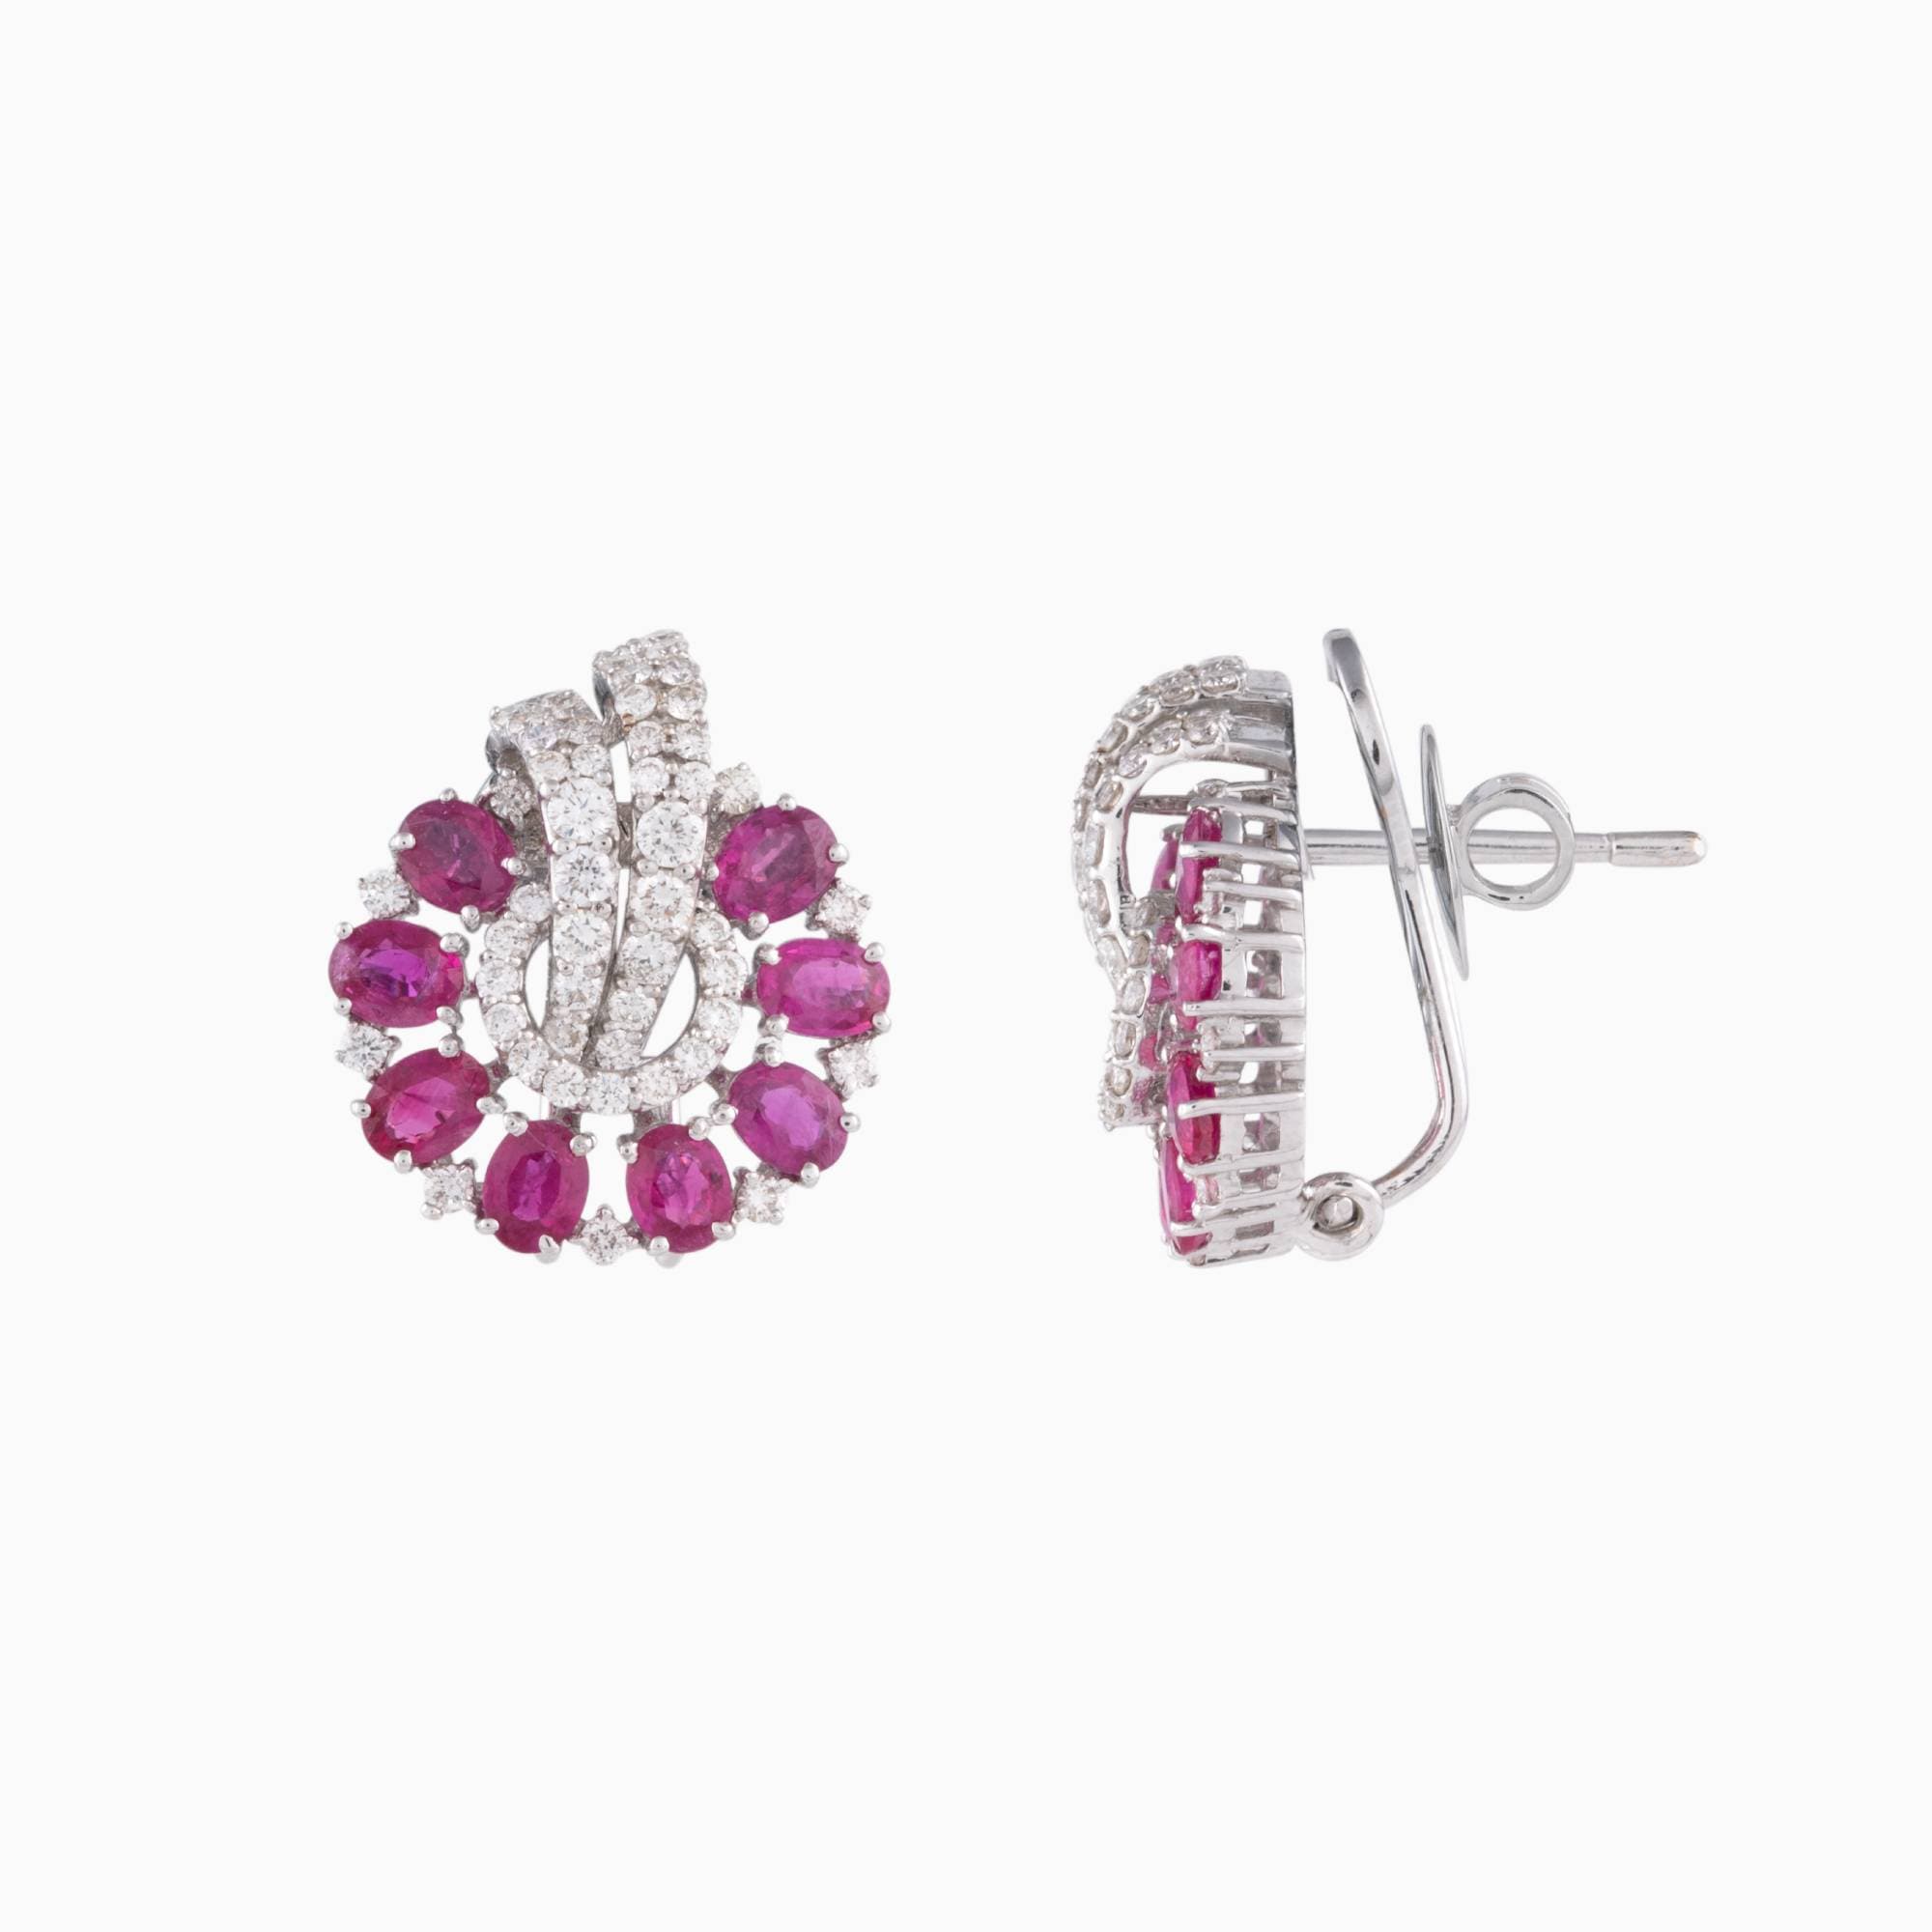 Earring pair with Round Cut Diamondand Ruby c/st-PGDE0198